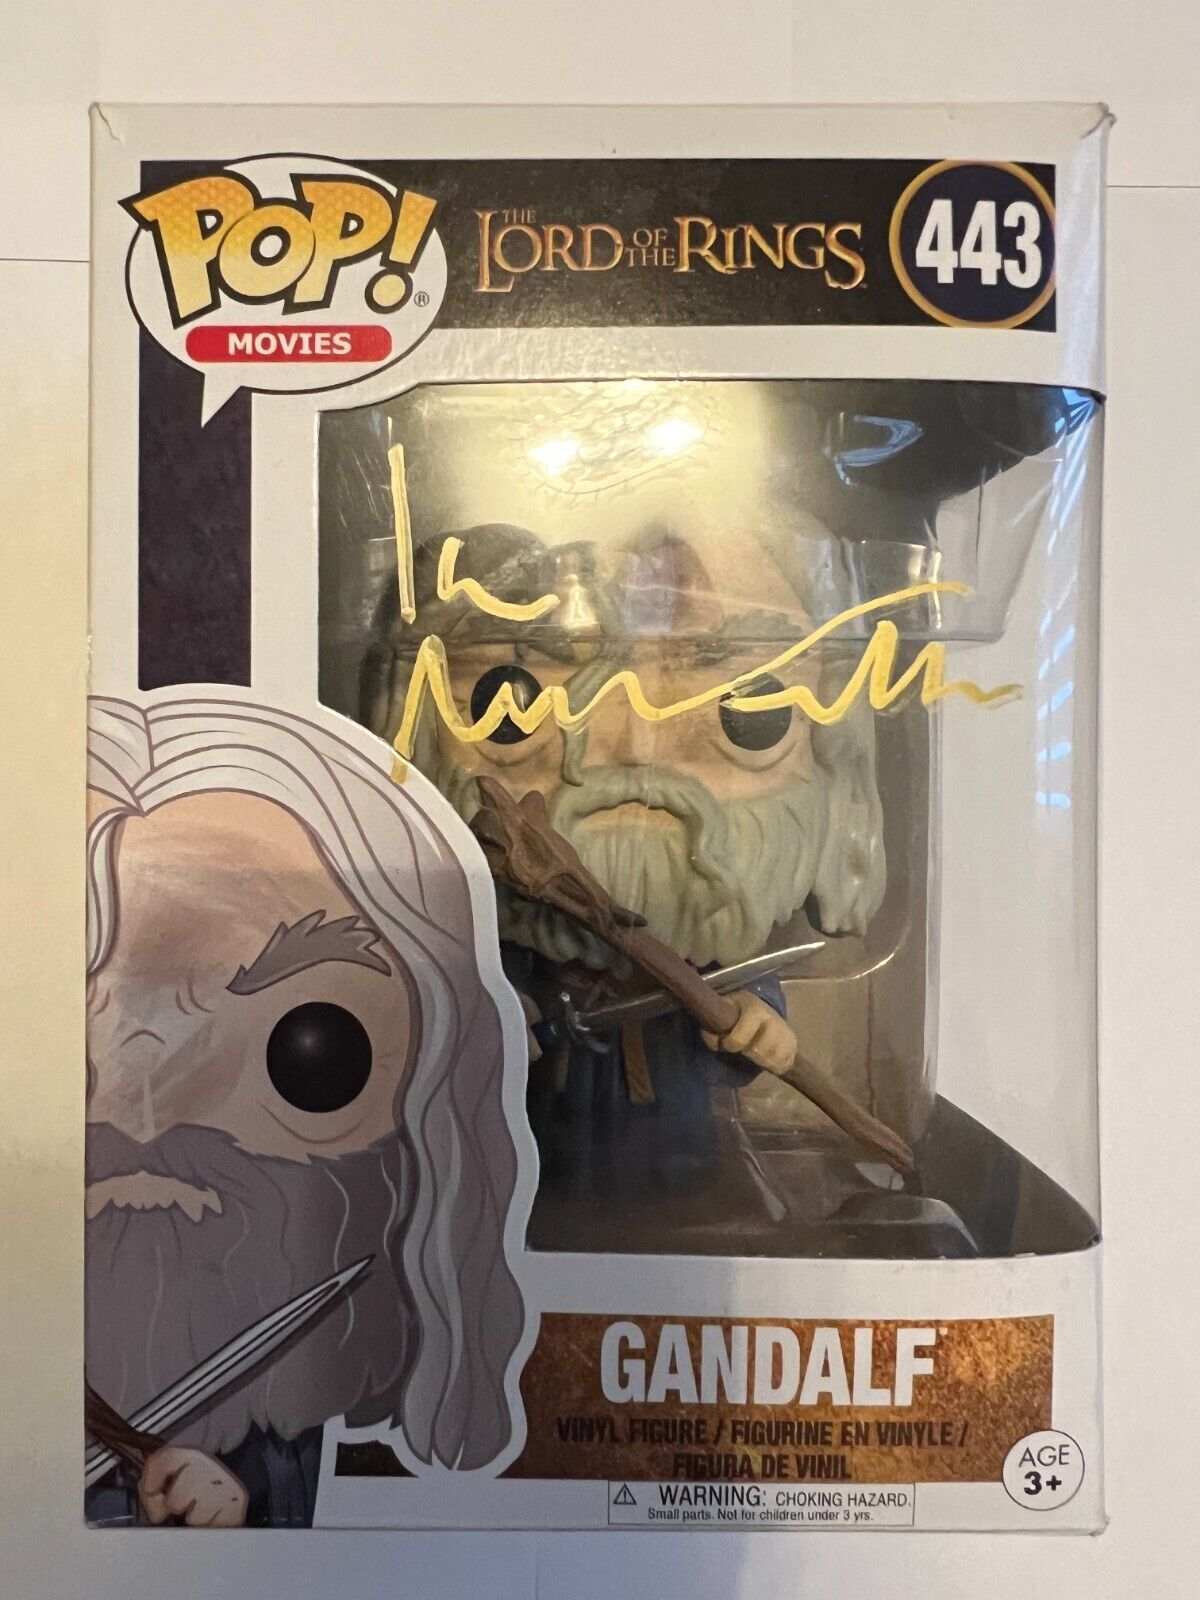 Ian McKellen - AUTOGRAPHED Gandalf Lord of the rings Funko Pop-See signing proof